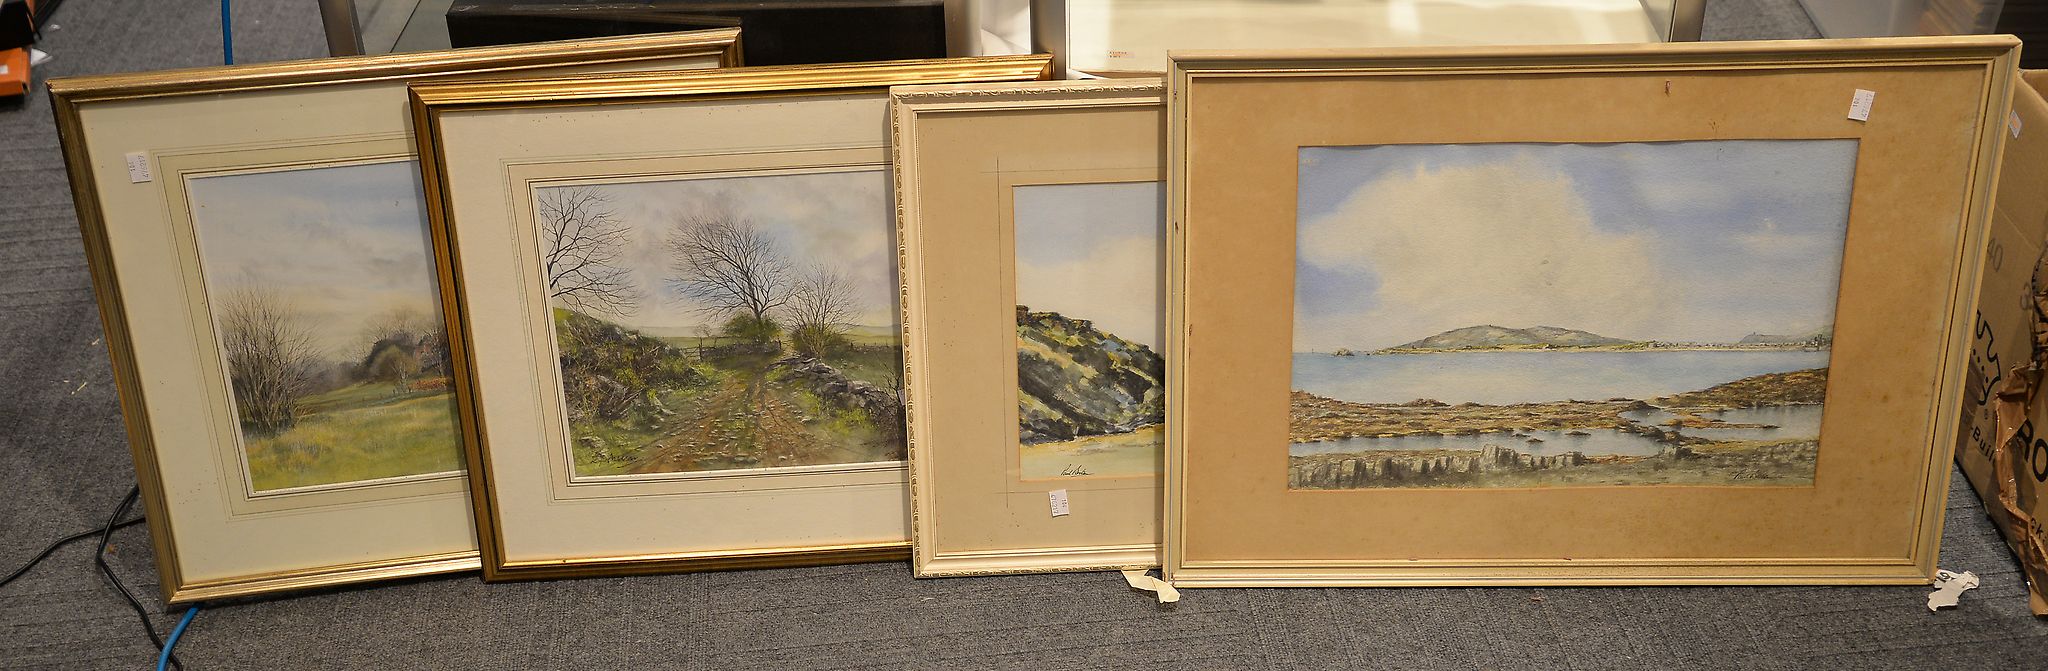 Paul Barton Two landscapes Watercolours Both signed Largest 34 x 49cm. (13 3/8 x 19 1/4in.) Together